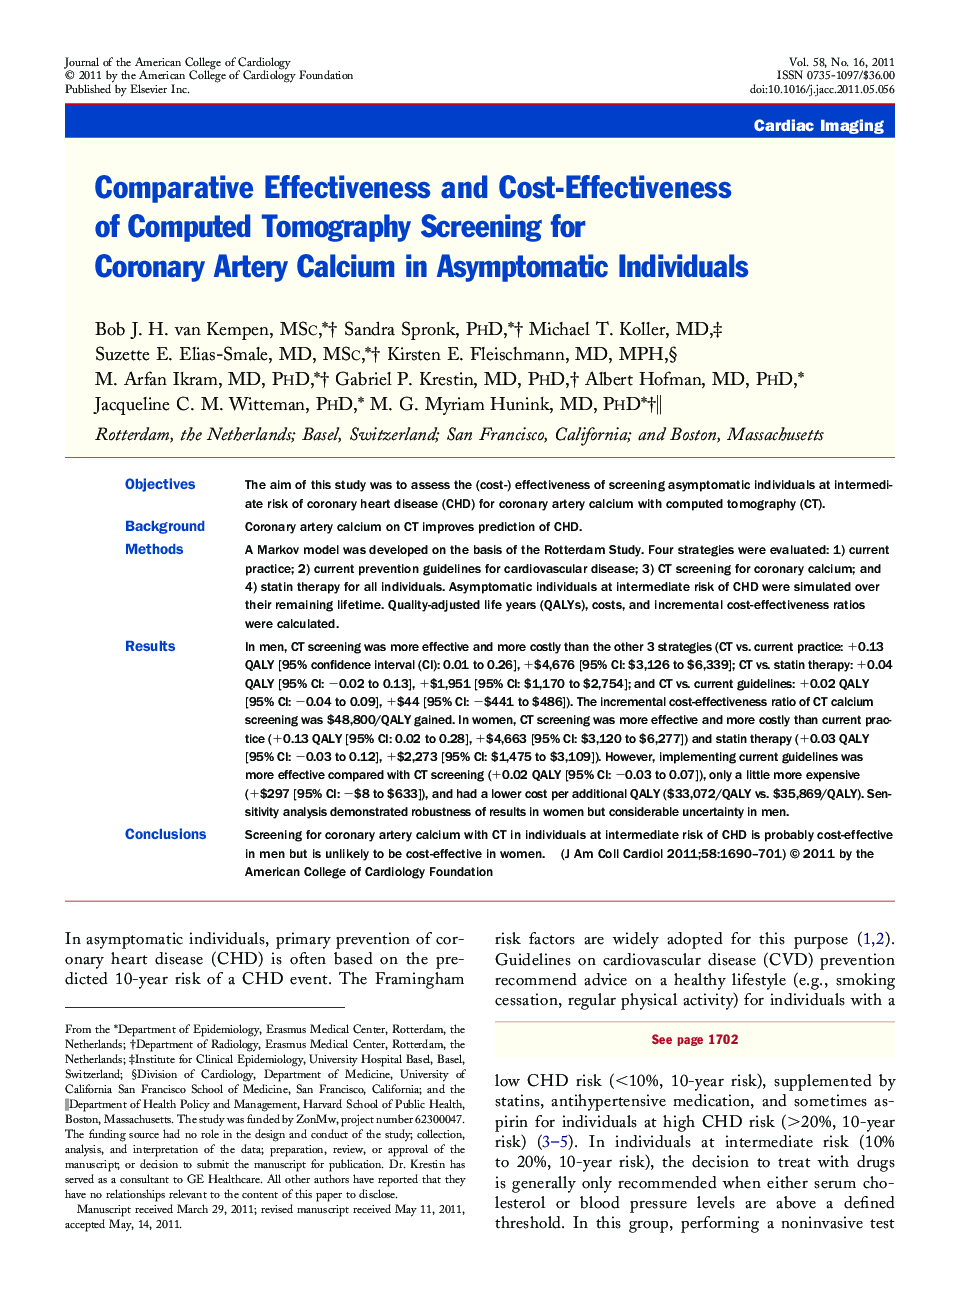 Comparative Effectiveness and Cost-Effectiveness of Computed Tomography Screening for Coronary Artery Calcium in Asymptomatic Individuals 